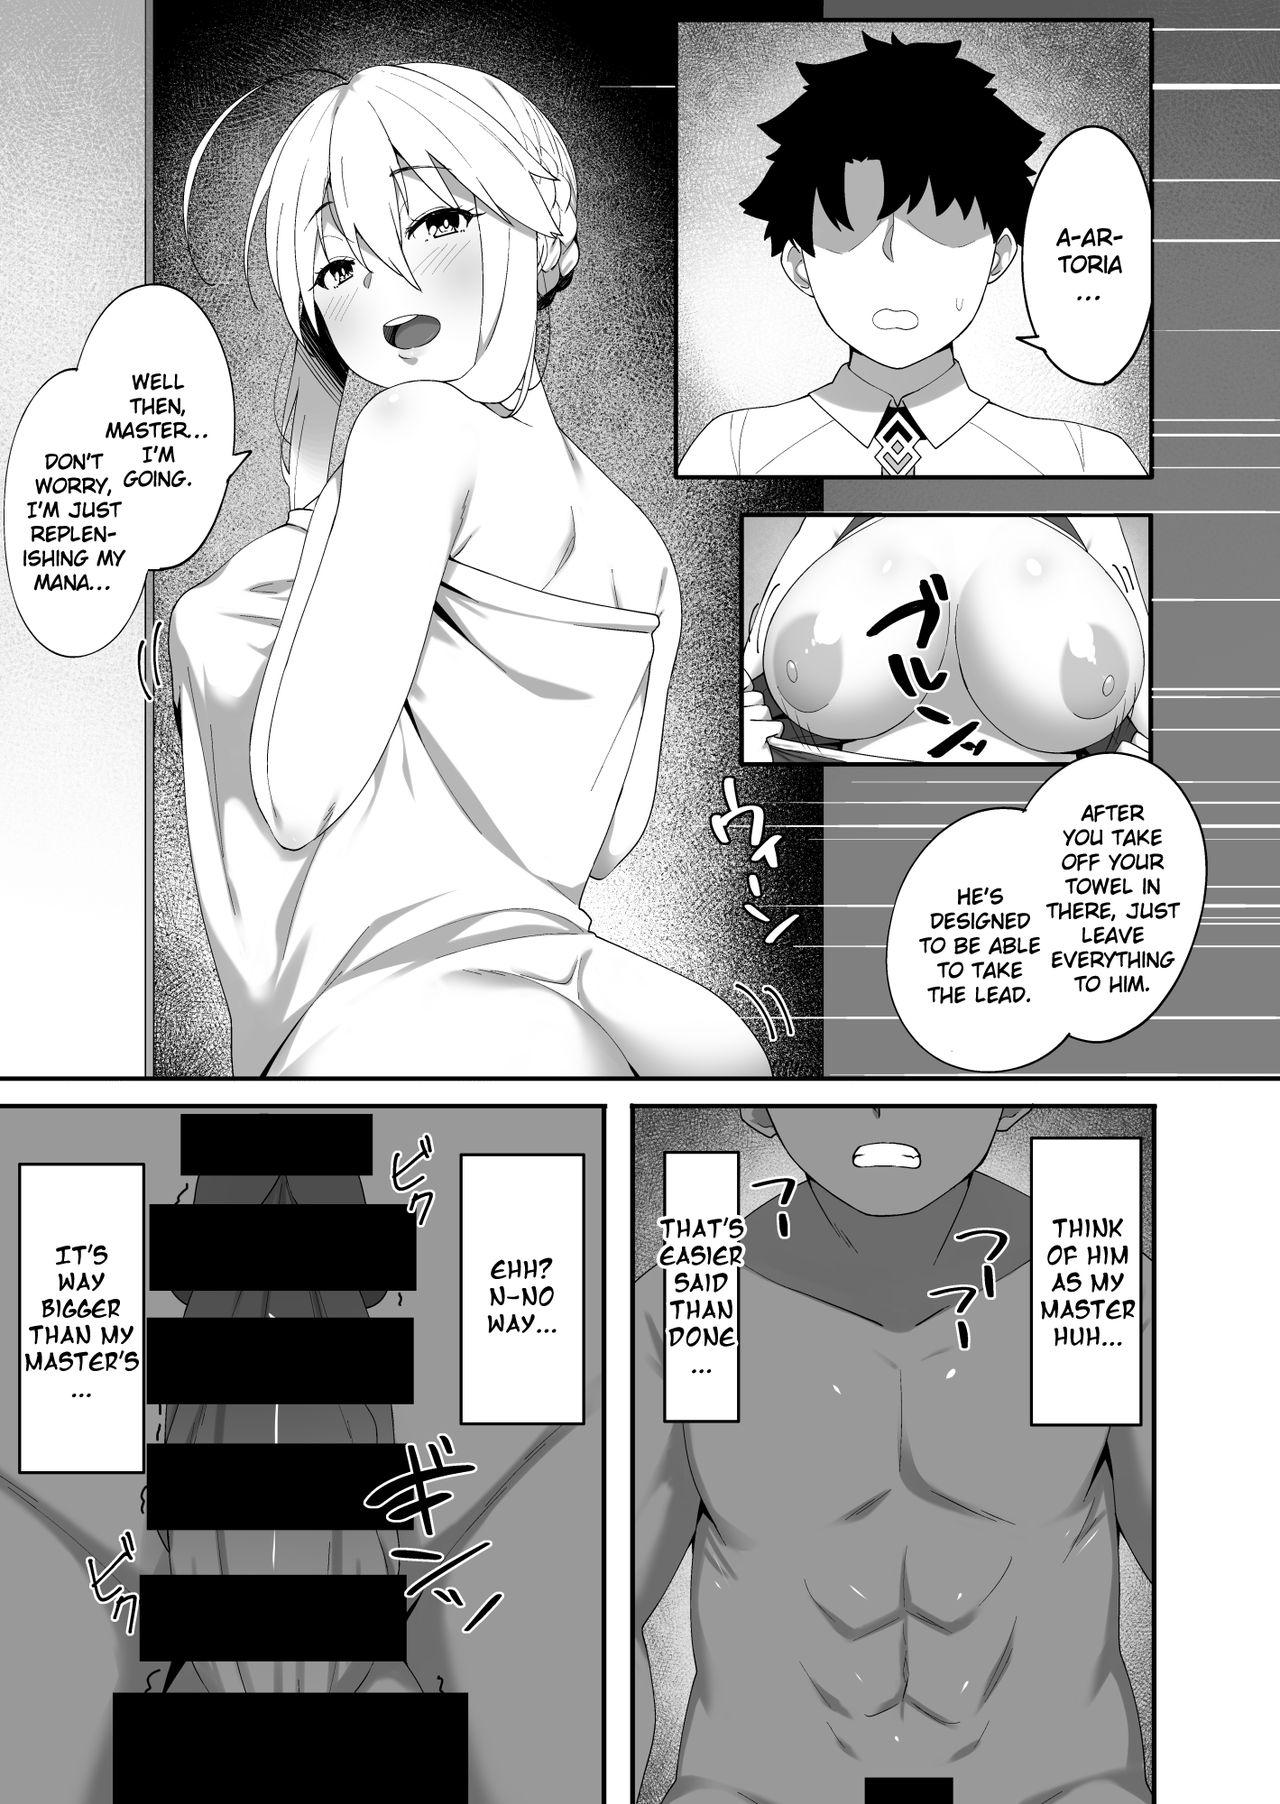 Hd Porn Kabe no Mukou de Kimi ga Naku 2 | Crying Out From The Other Side Of The Wall 2 - Fate grand order Nut - Page 4